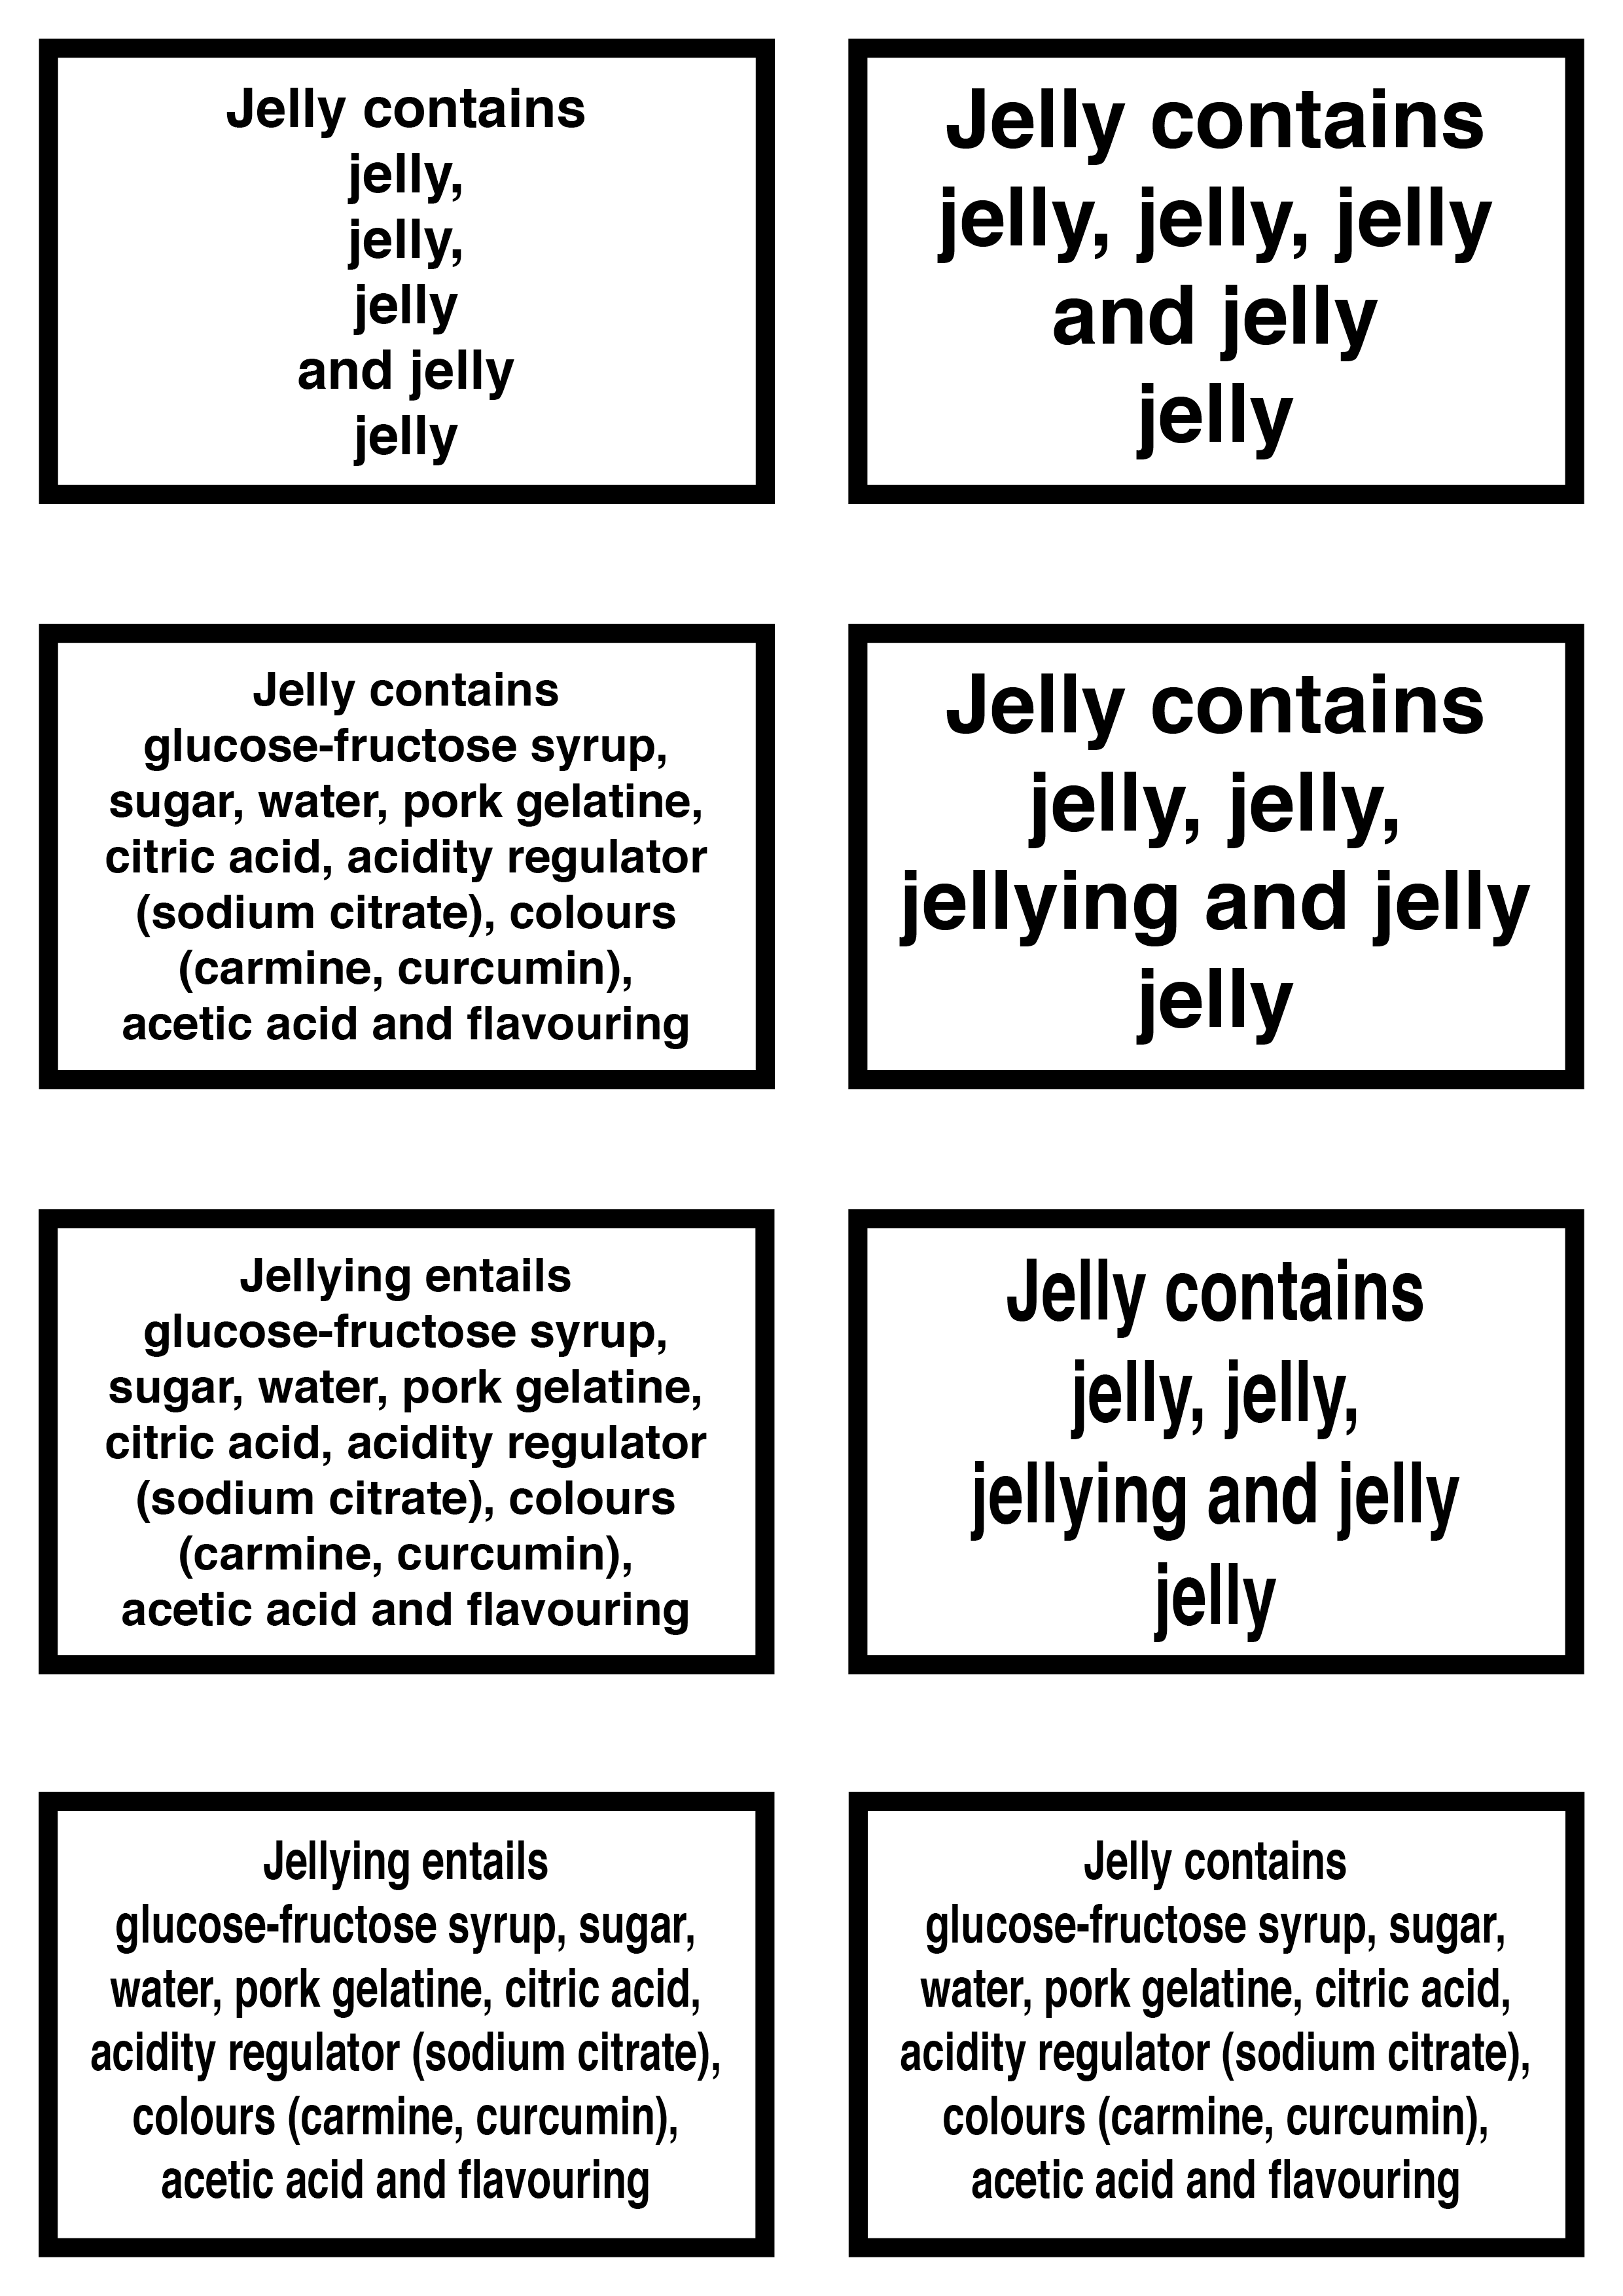 %22Relativistic Milennial Jelly%22 Warning Signs [Batch 1]6.png